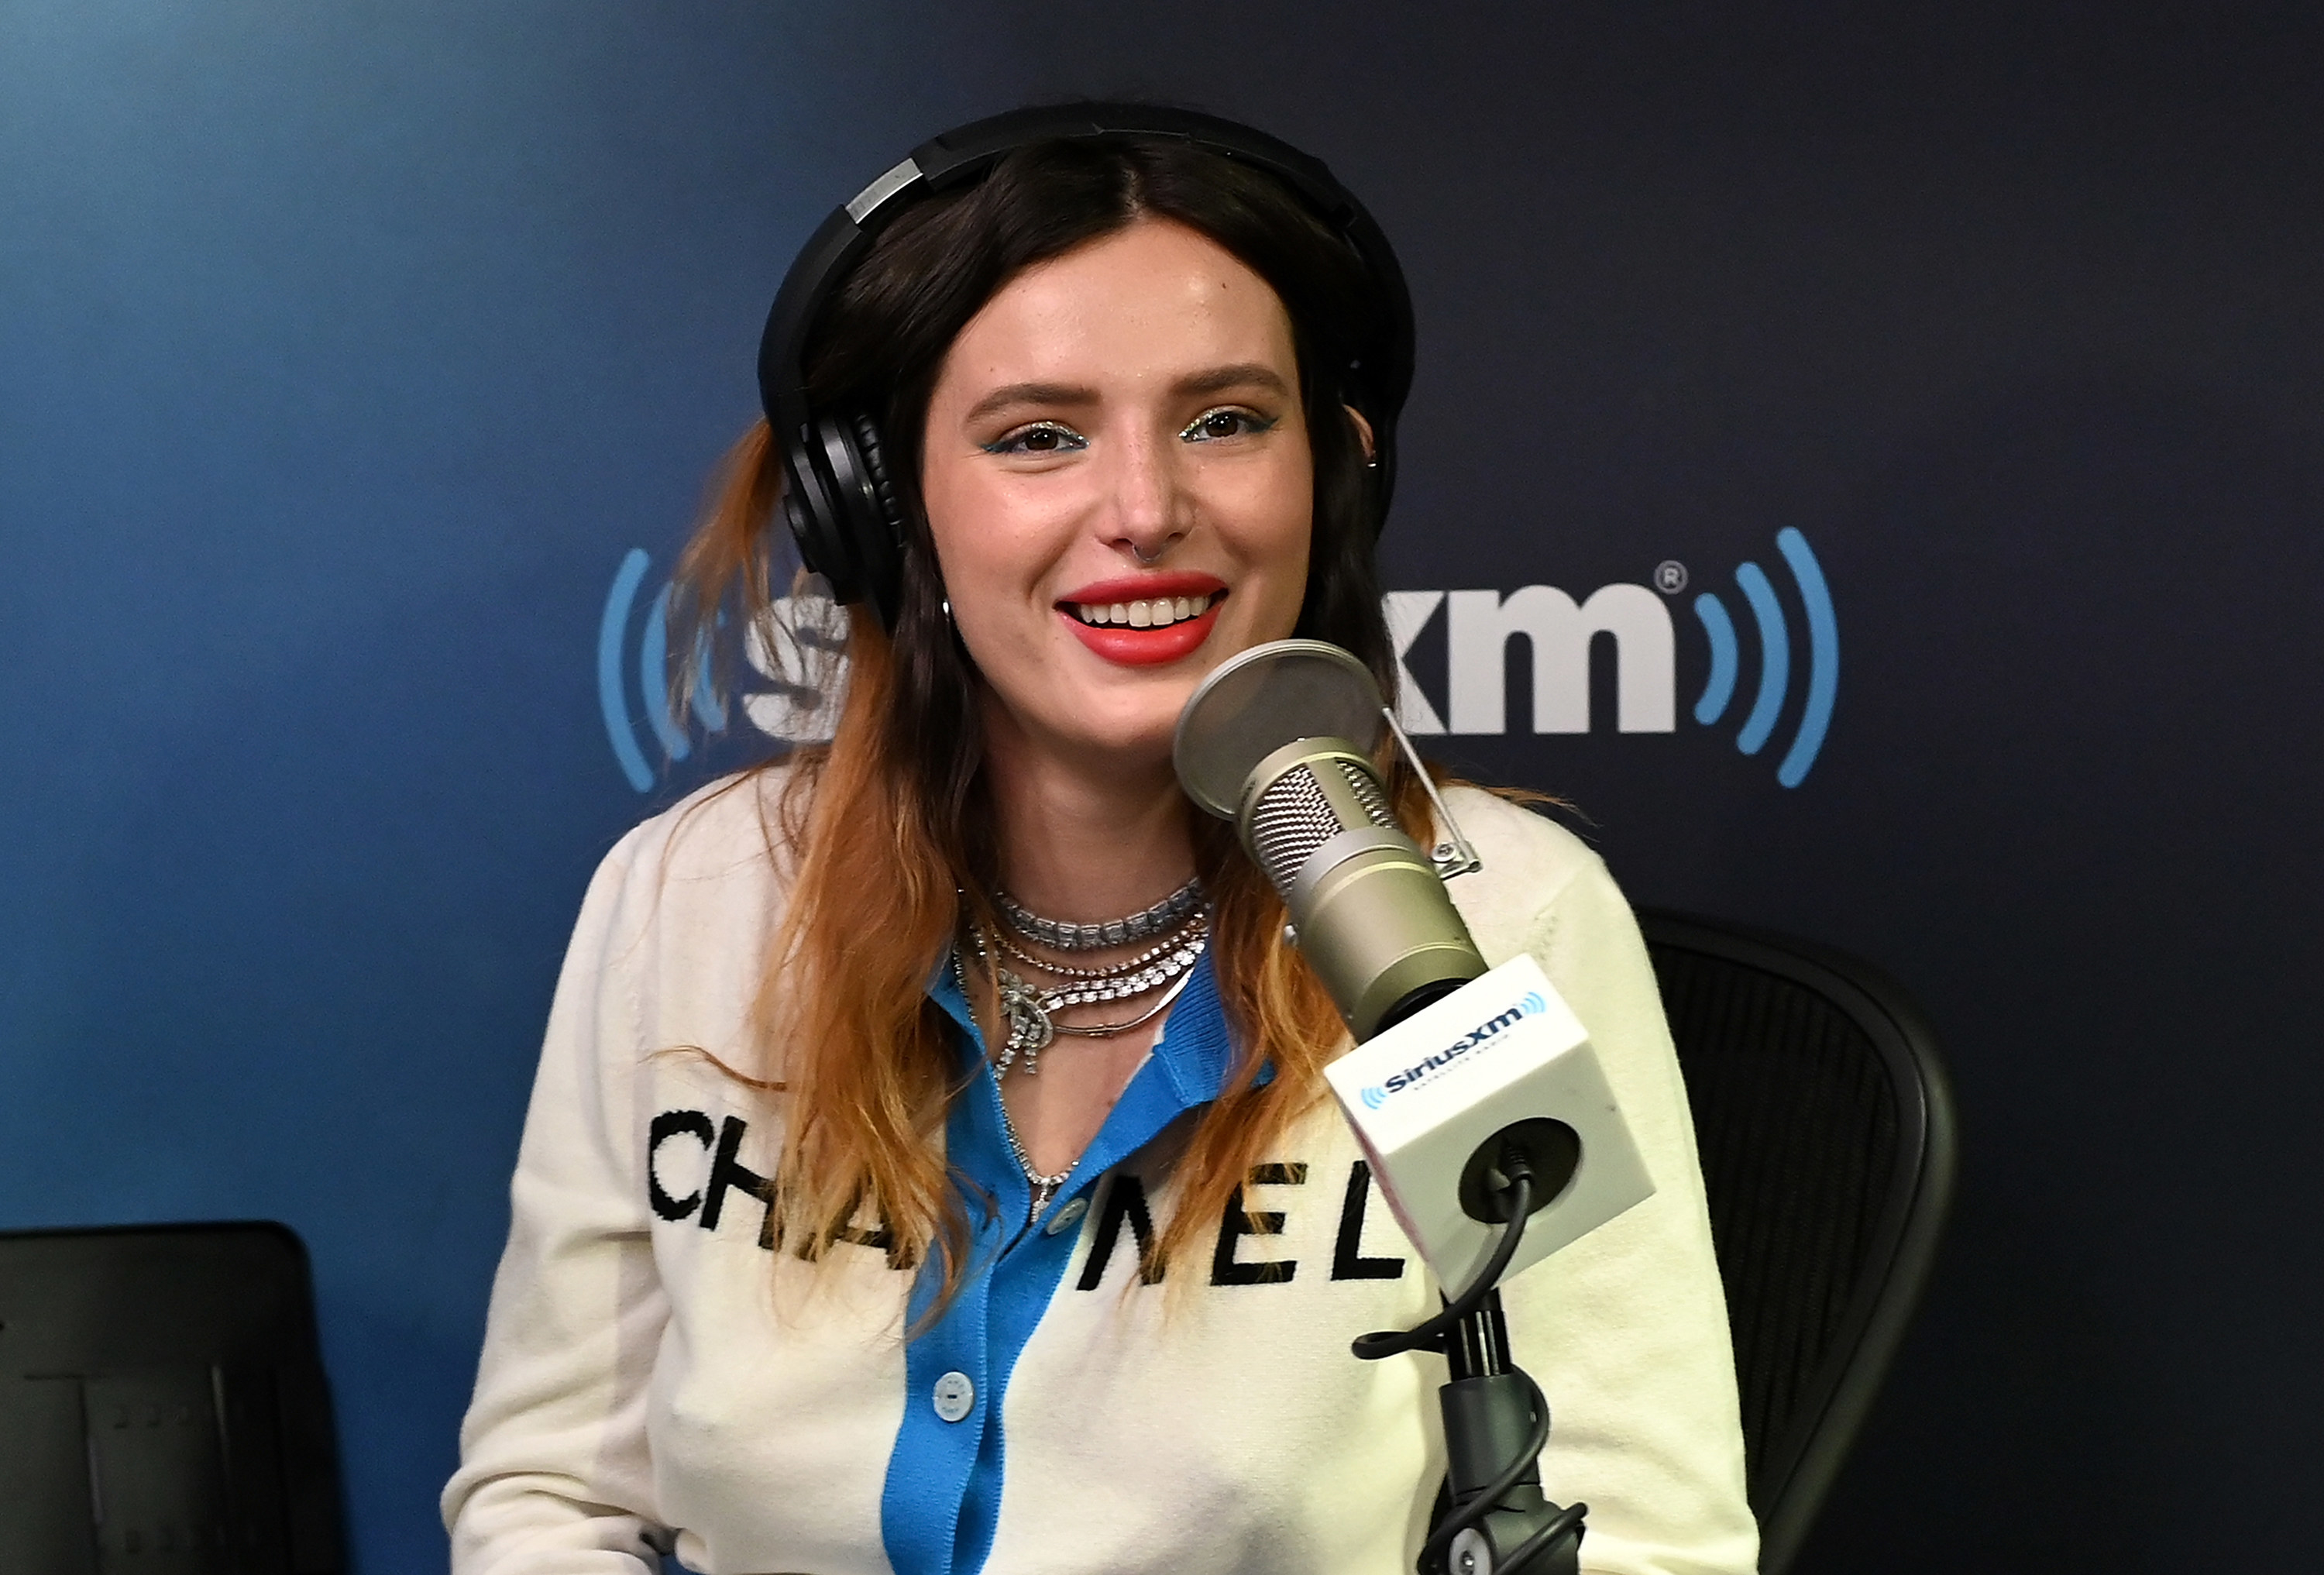 Bella smiles during a sit-down interview for Sirius XM